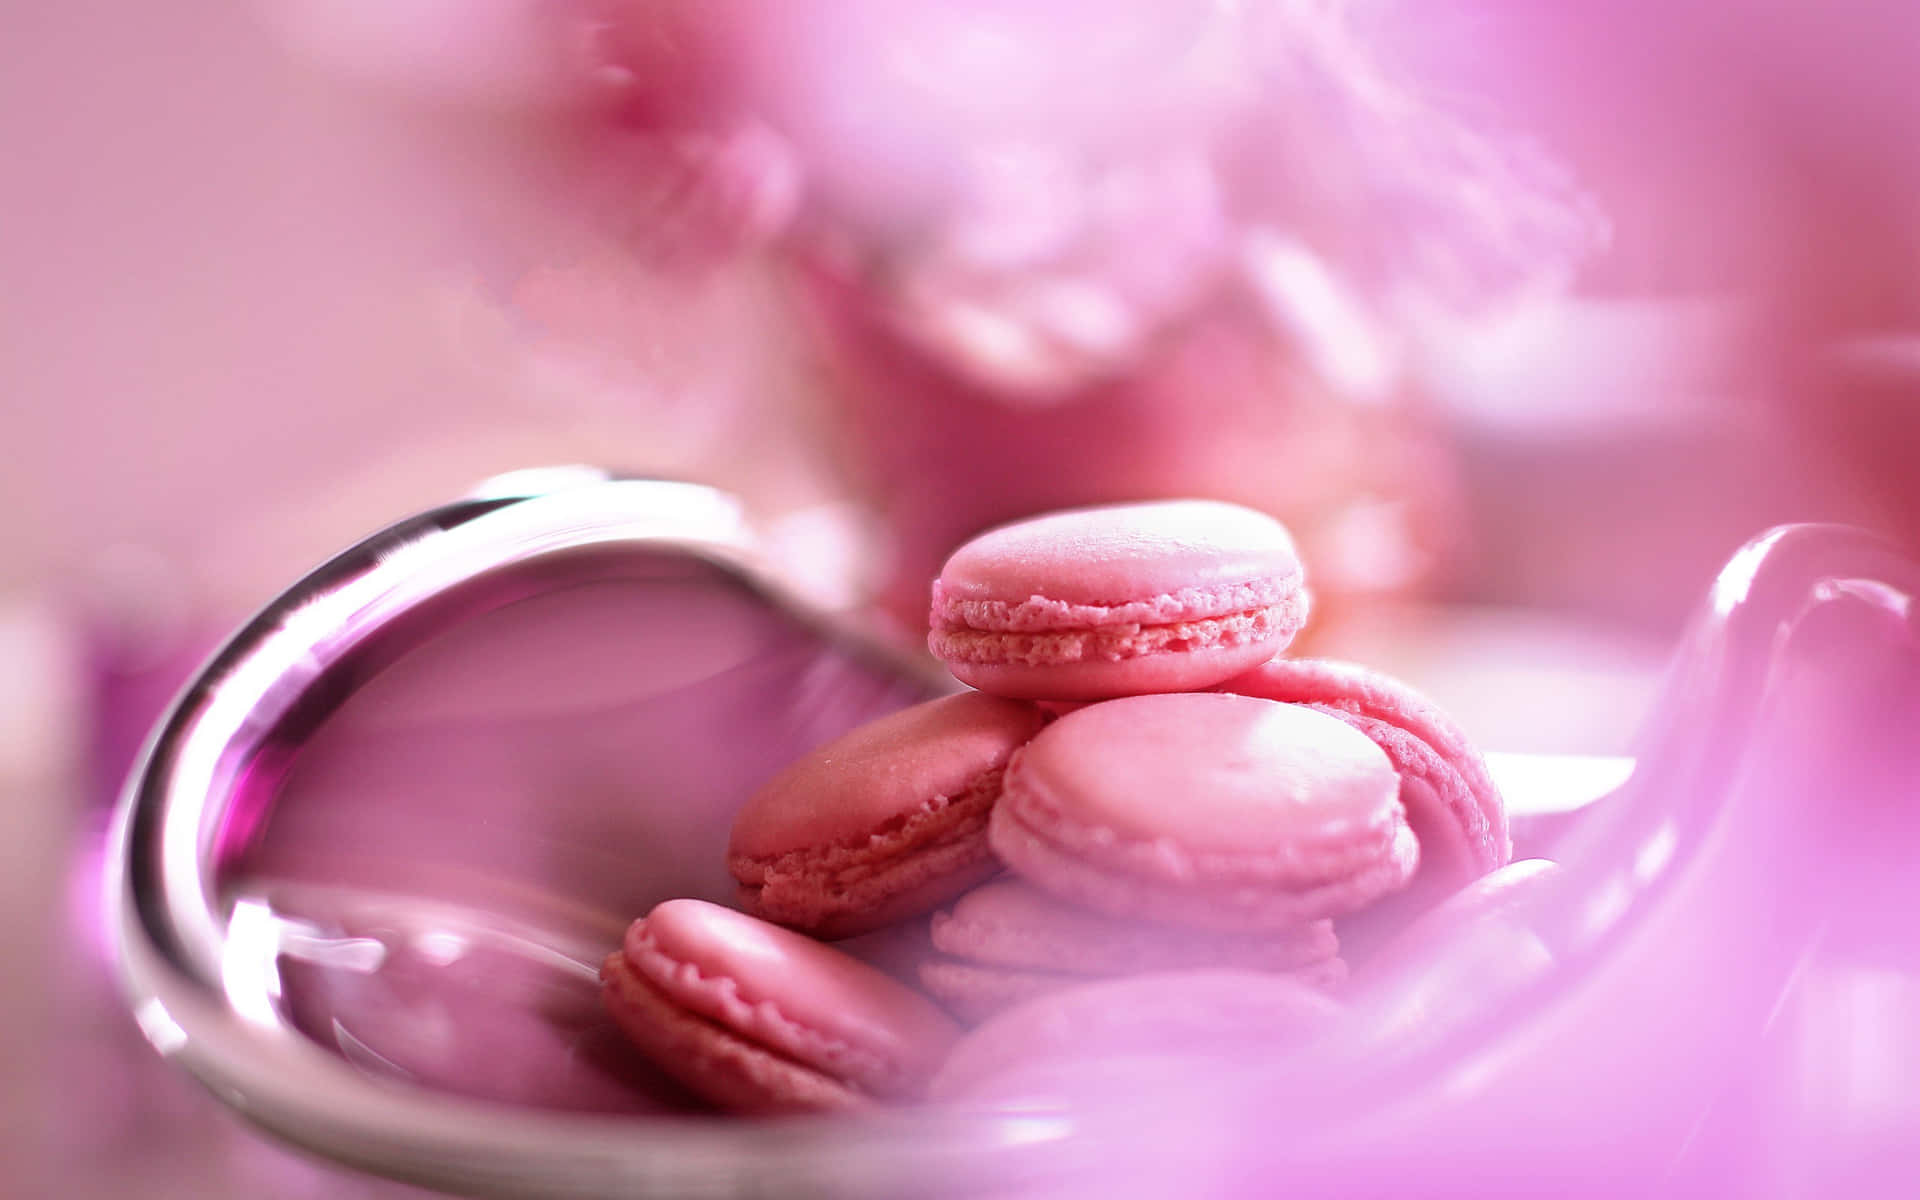 Macarons Pictures